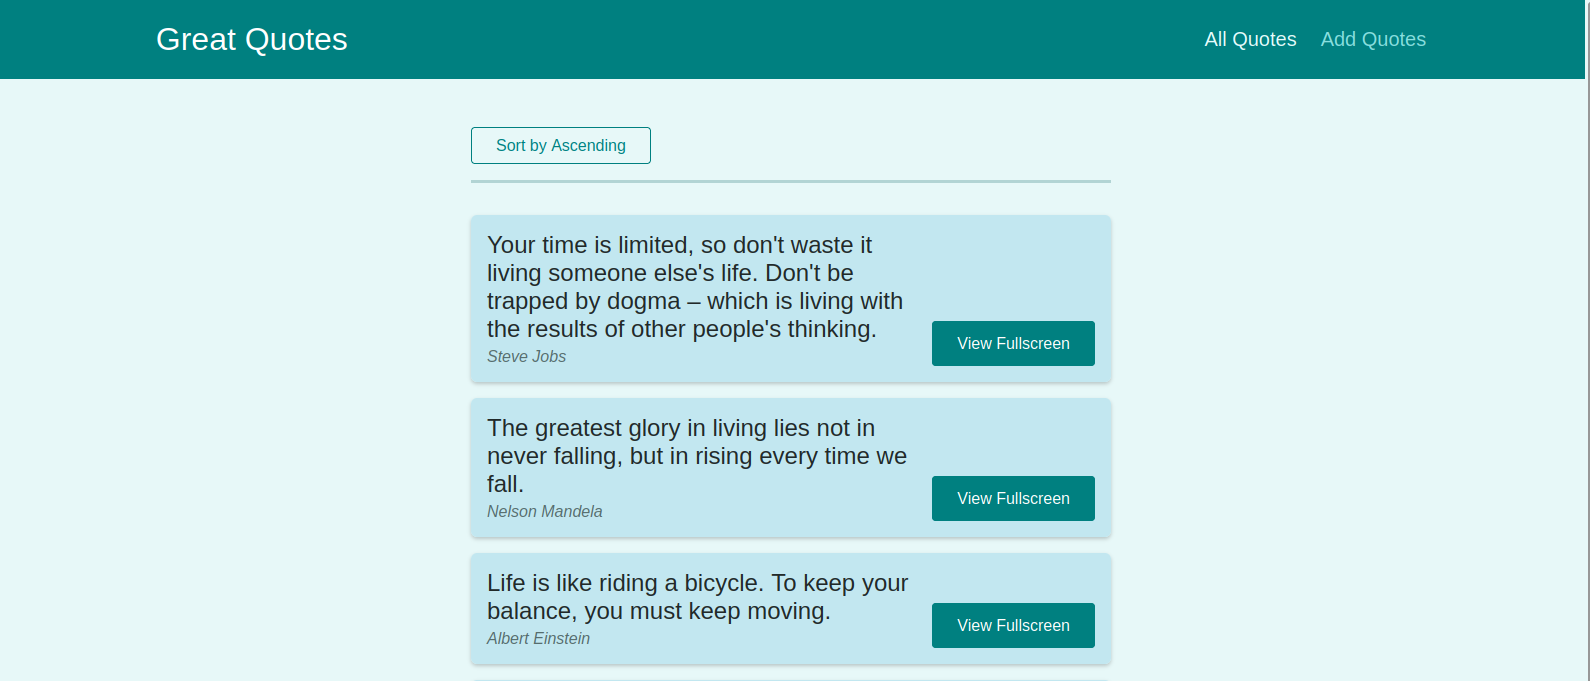 Home view of the quotes app